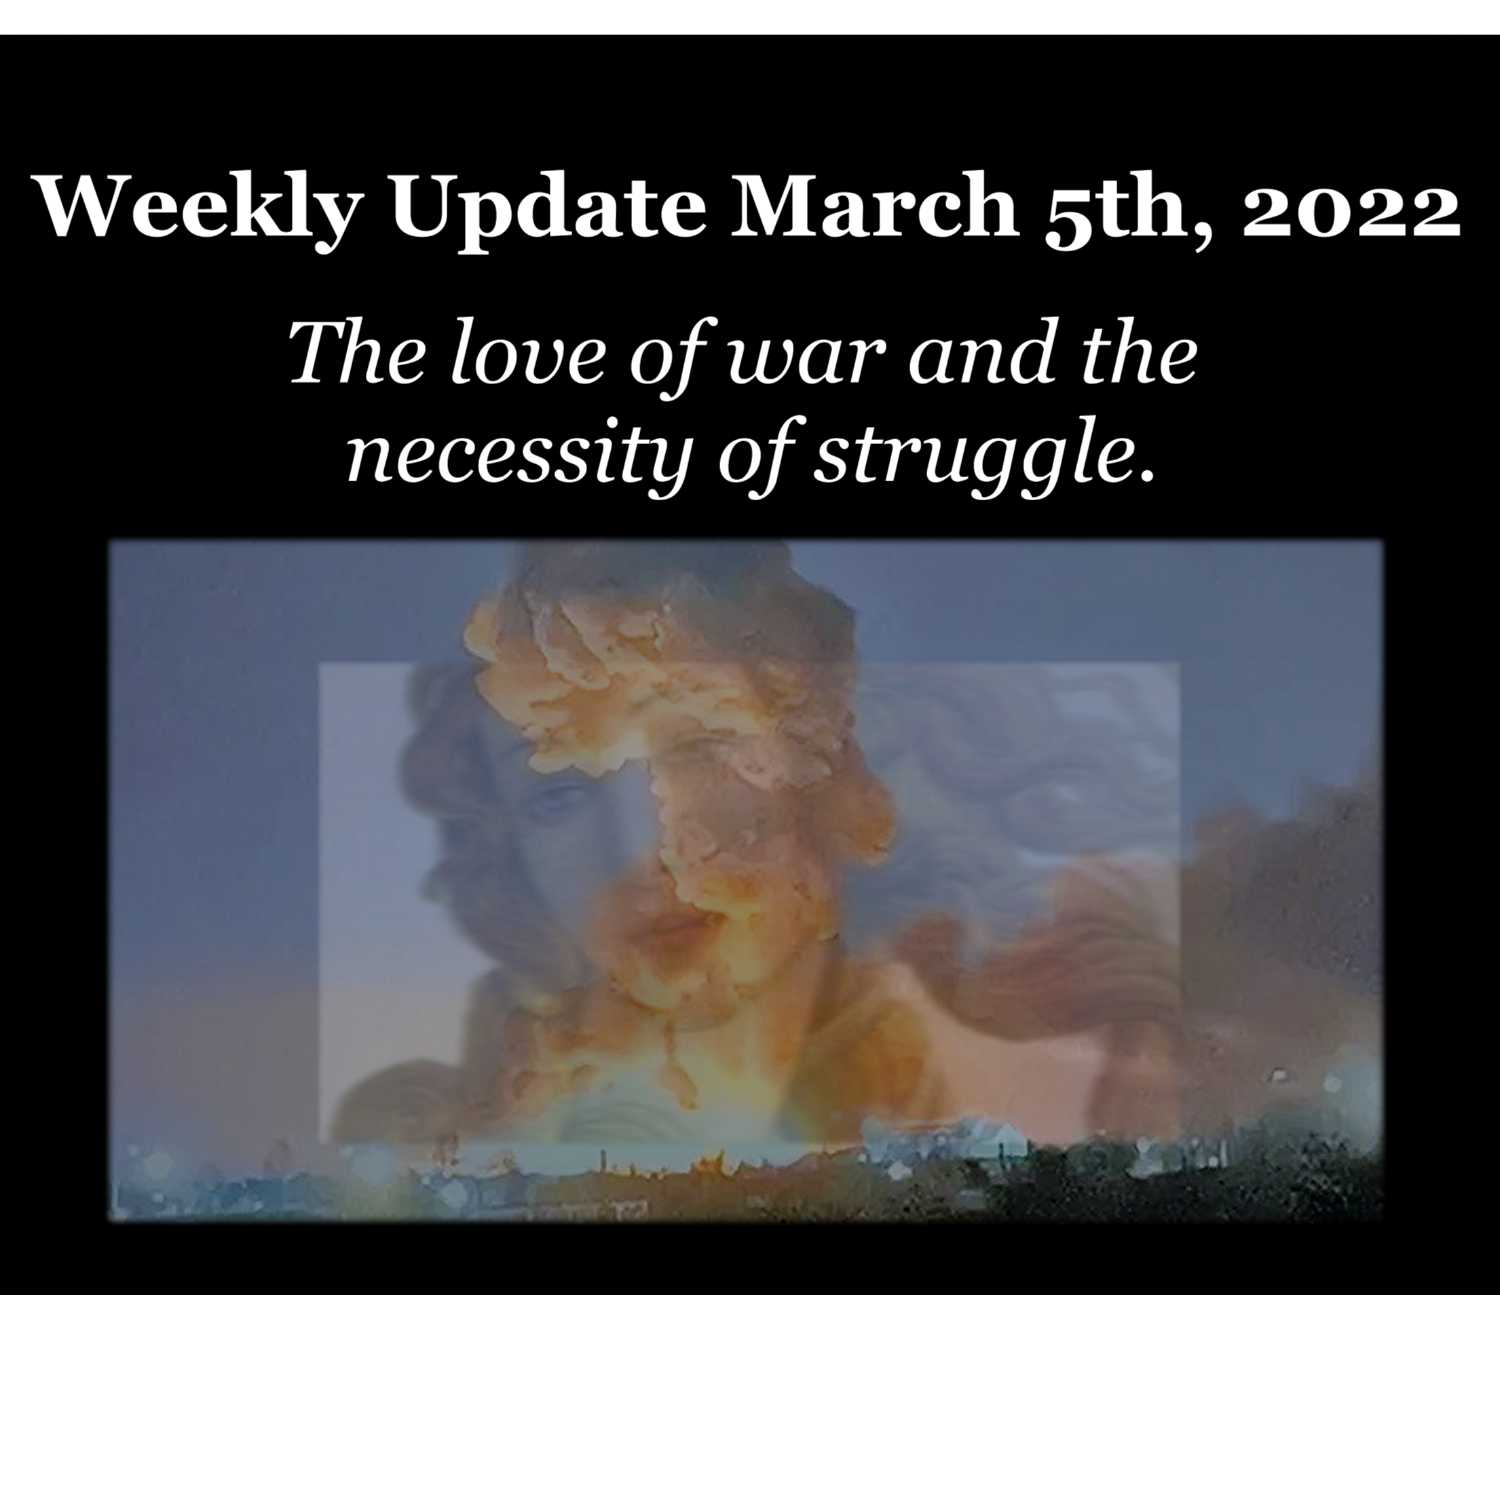 Weekly Update March 5, 2022